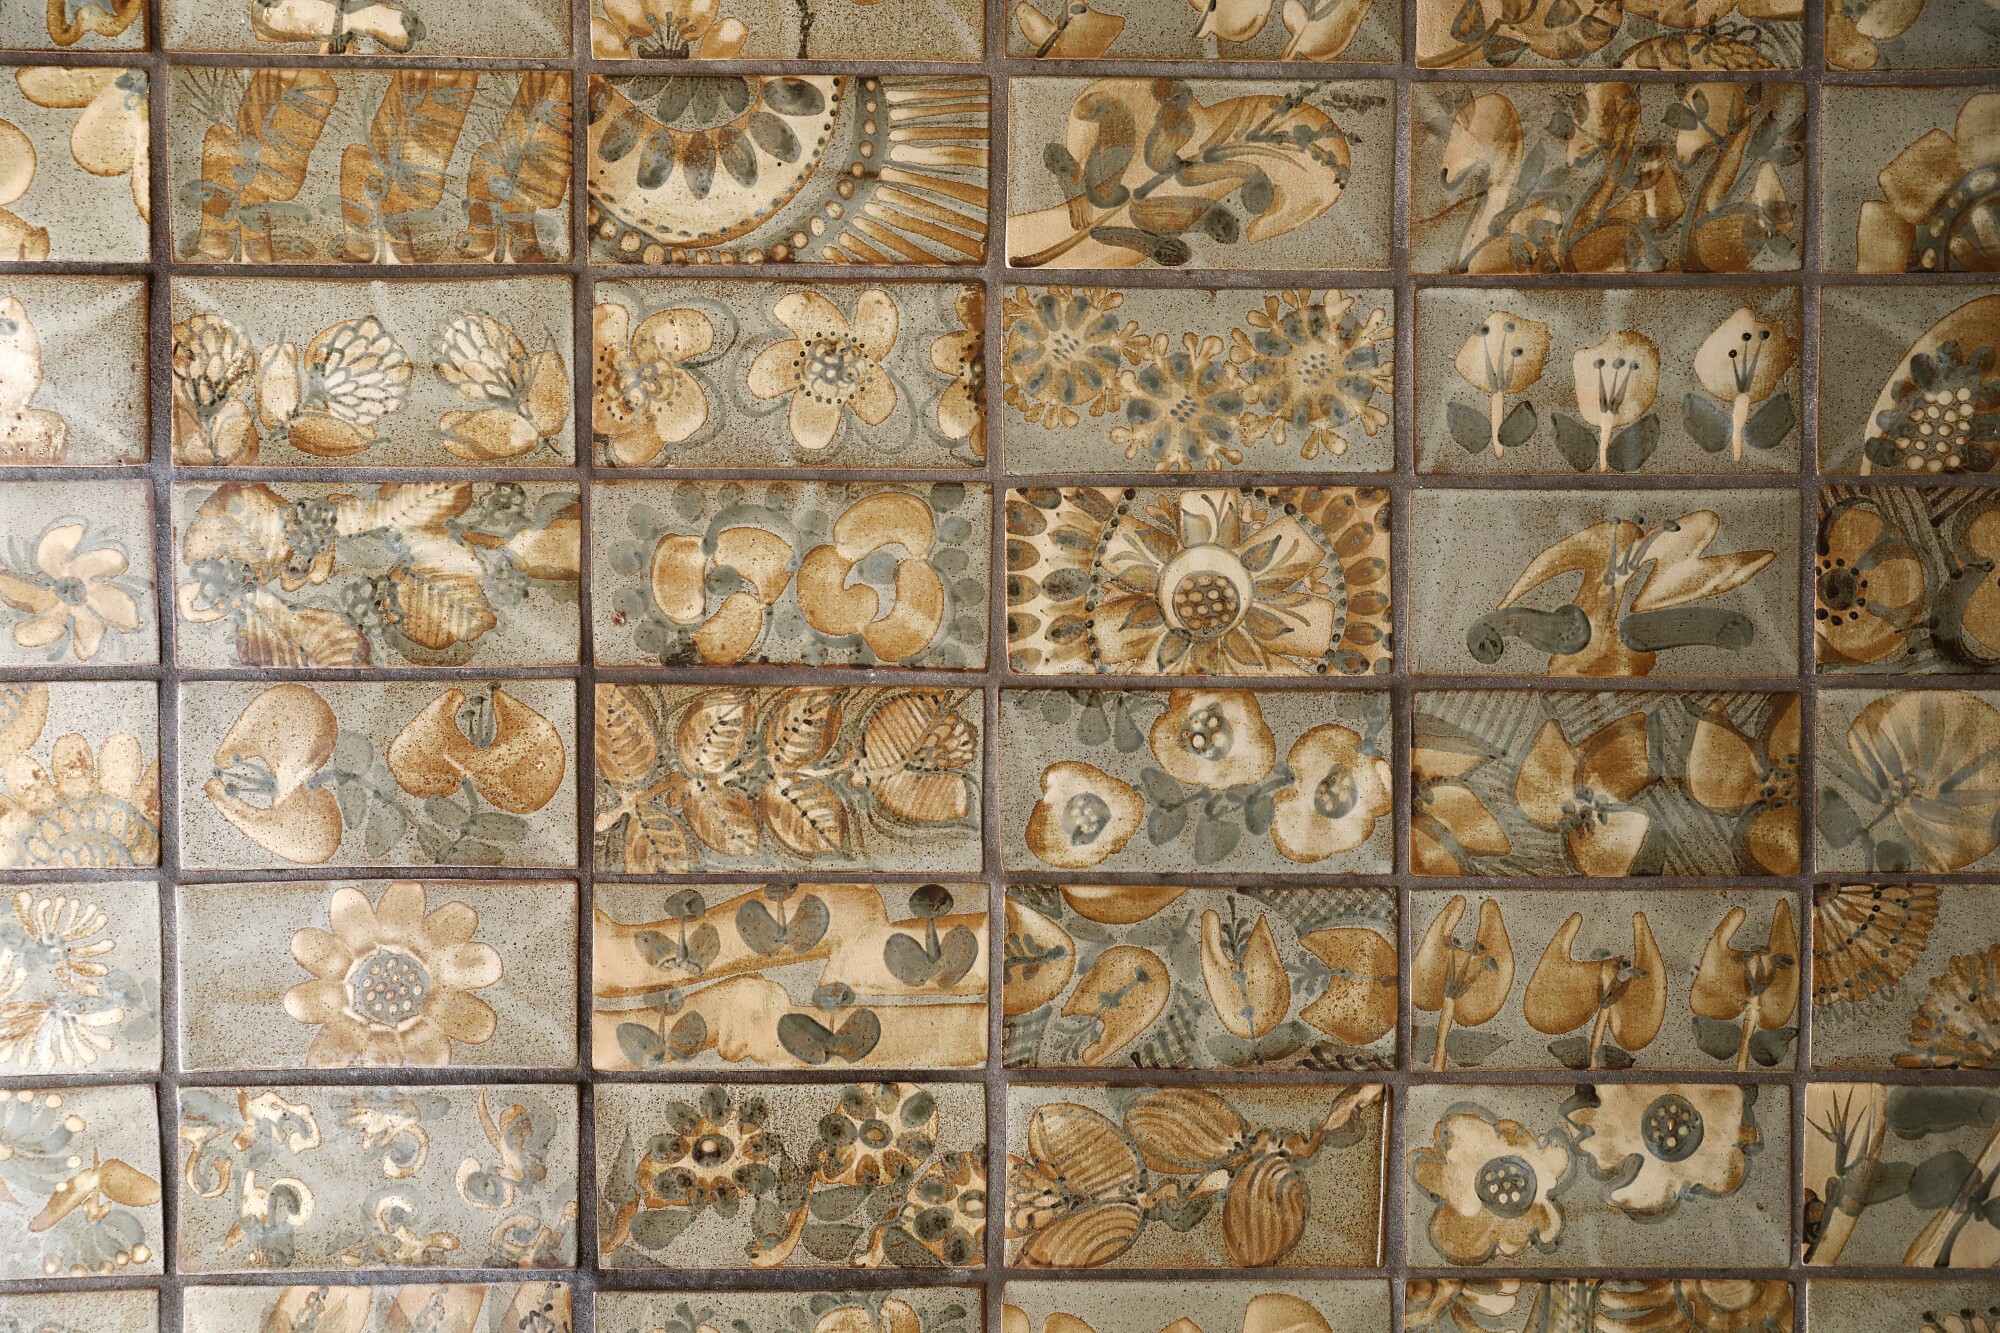 A close-up of hand-painted tiles bearing natural motifs such as flowers and leaves by Dora De Larios